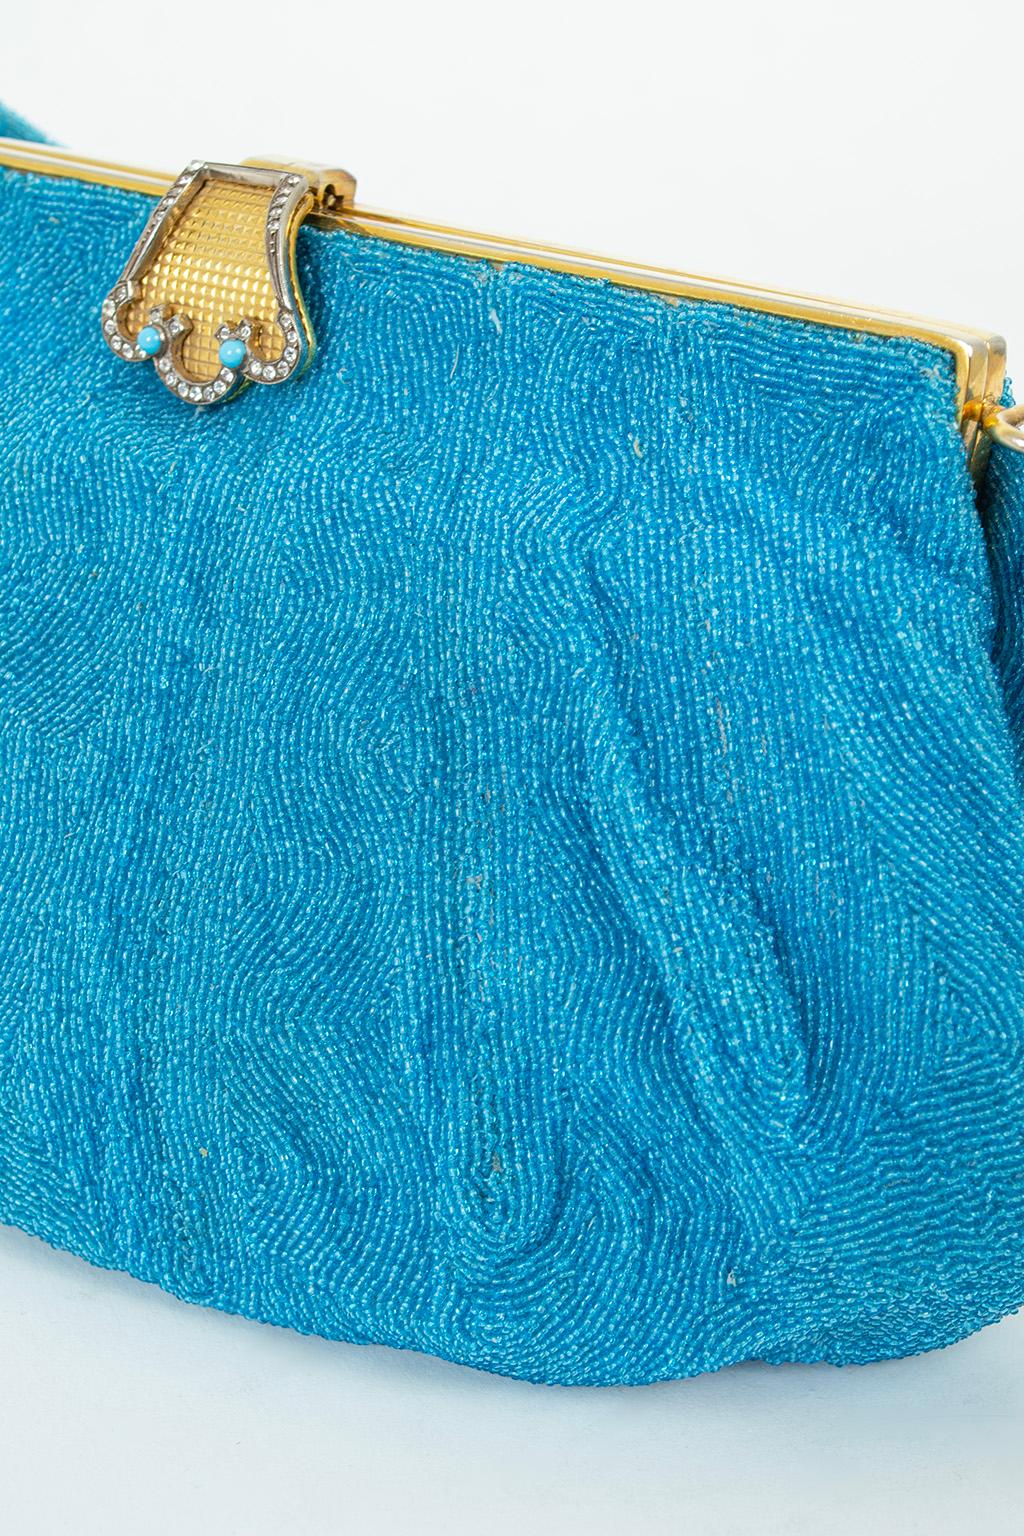 Women's George Baring Turquoise Micro Bead and Jewel Pochette Evening Bag – Paris, 1950s